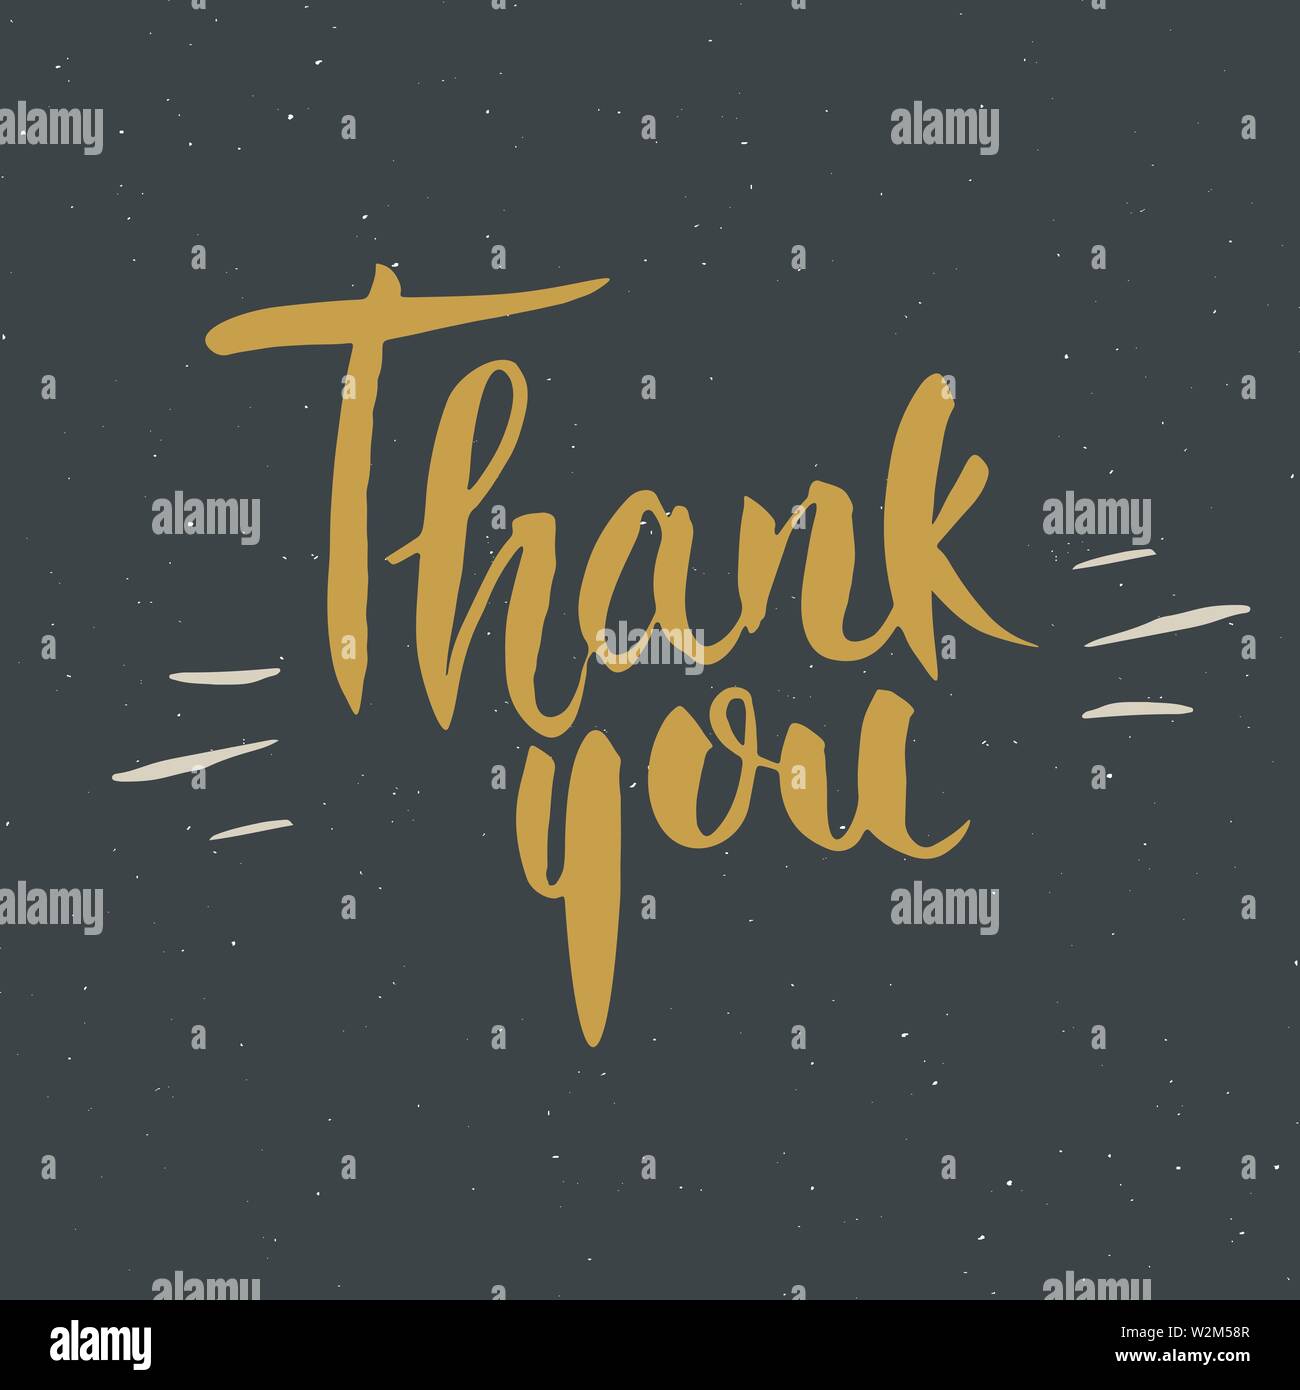 Thank you lettering quote, Hand drawn calligraphic sign. Vector illustration. Stock Vector